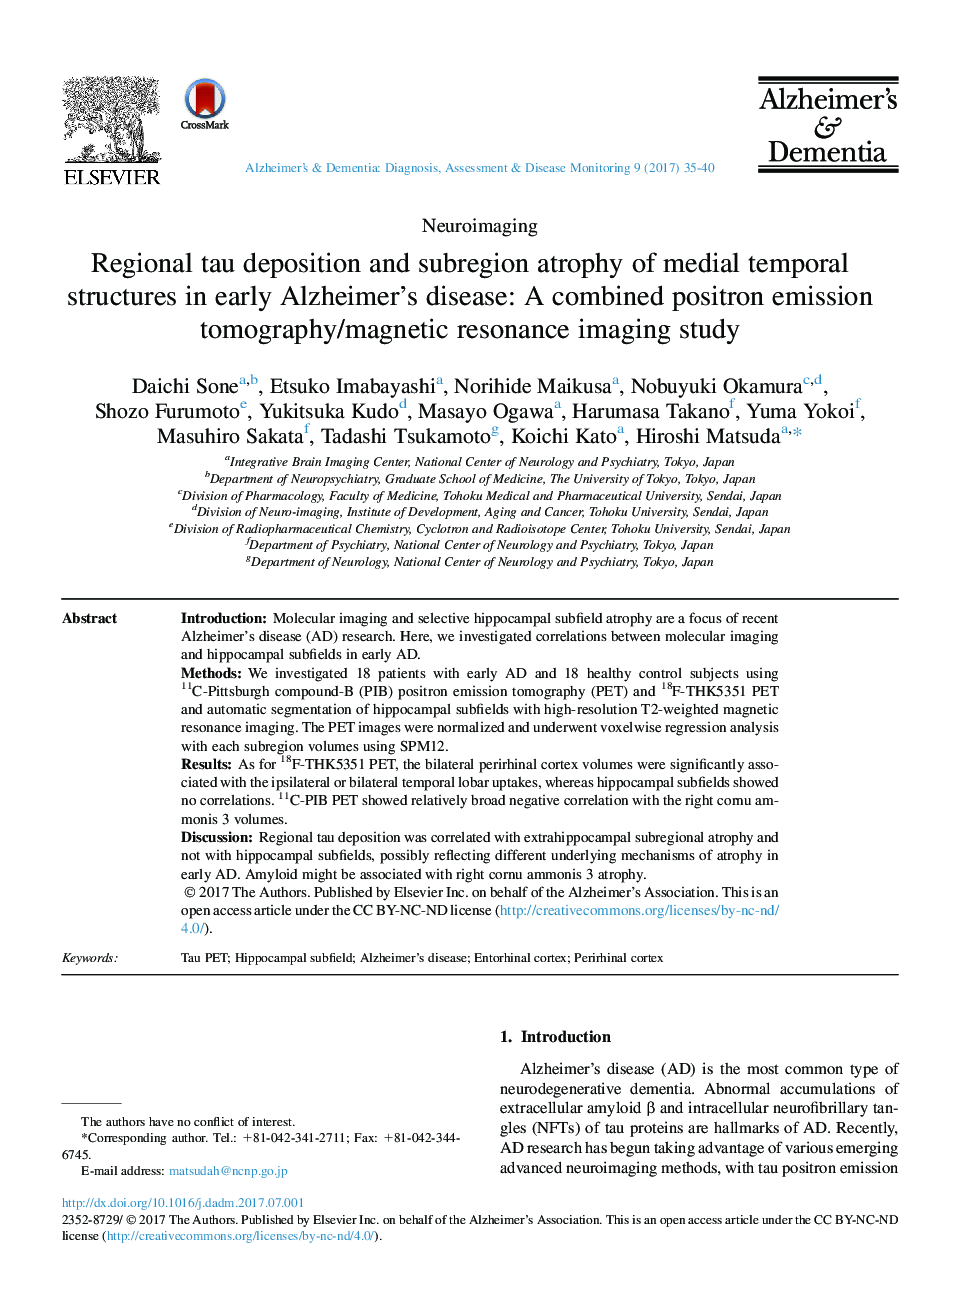 Regional tau deposition and subregion atrophy of medial temporal structures in early Alzheimer's disease: A combined positron emission tomography/magnetic resonance imaging study